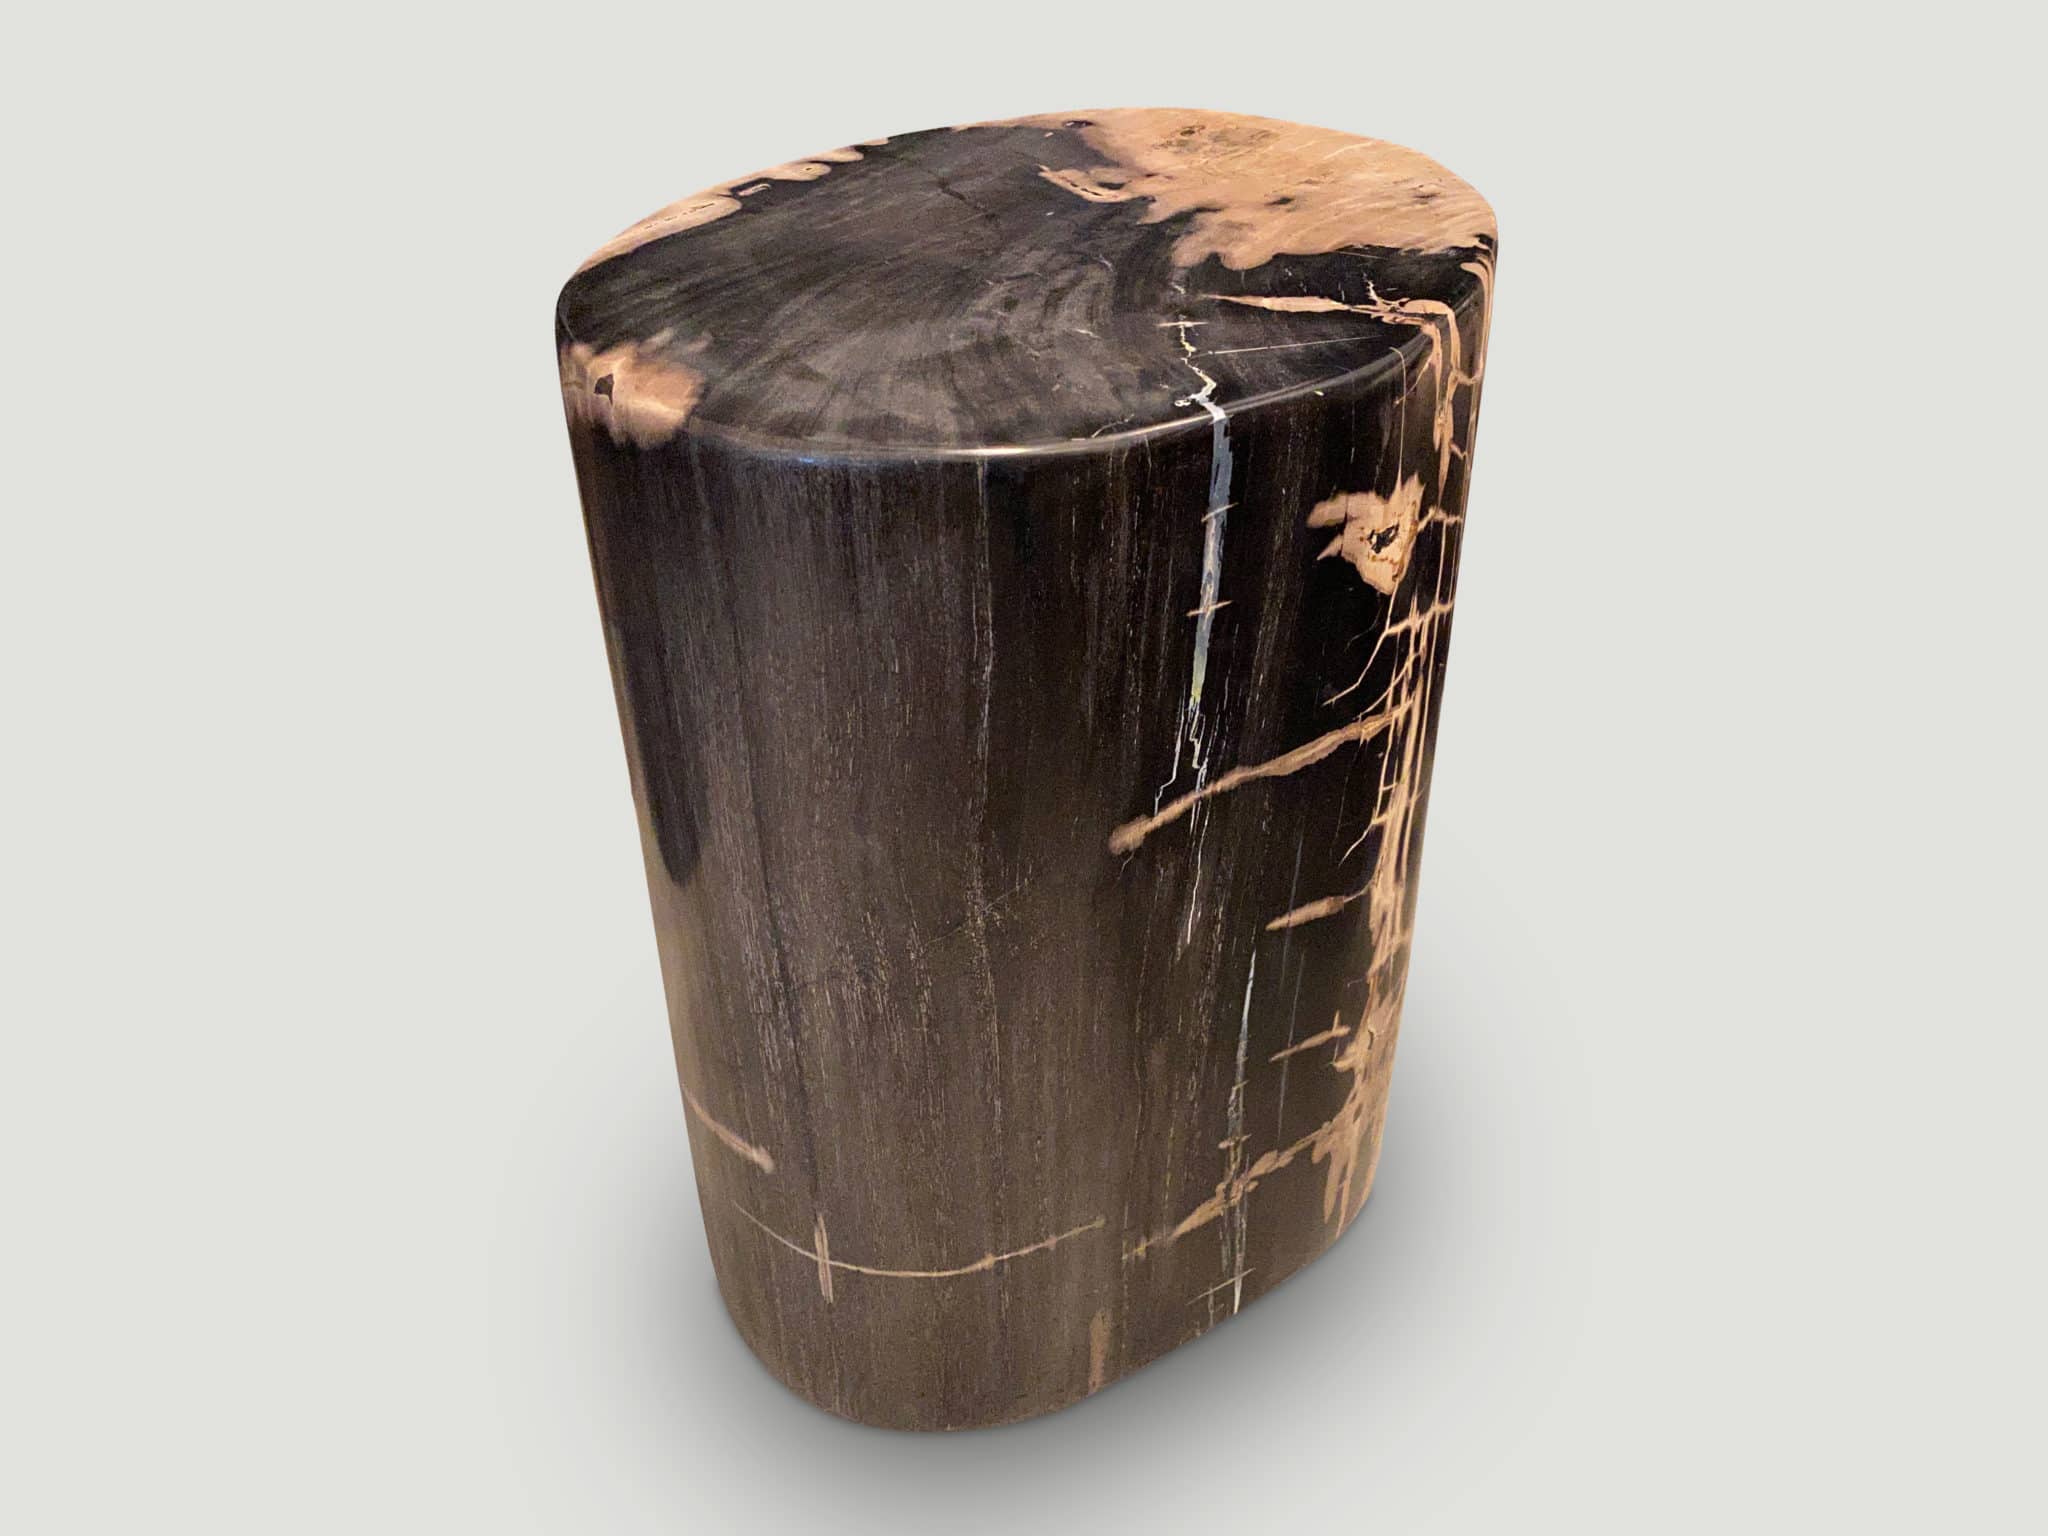 EXQUISITE HIGH QUALITY PETRIFIED WOOD SIDE TABLE